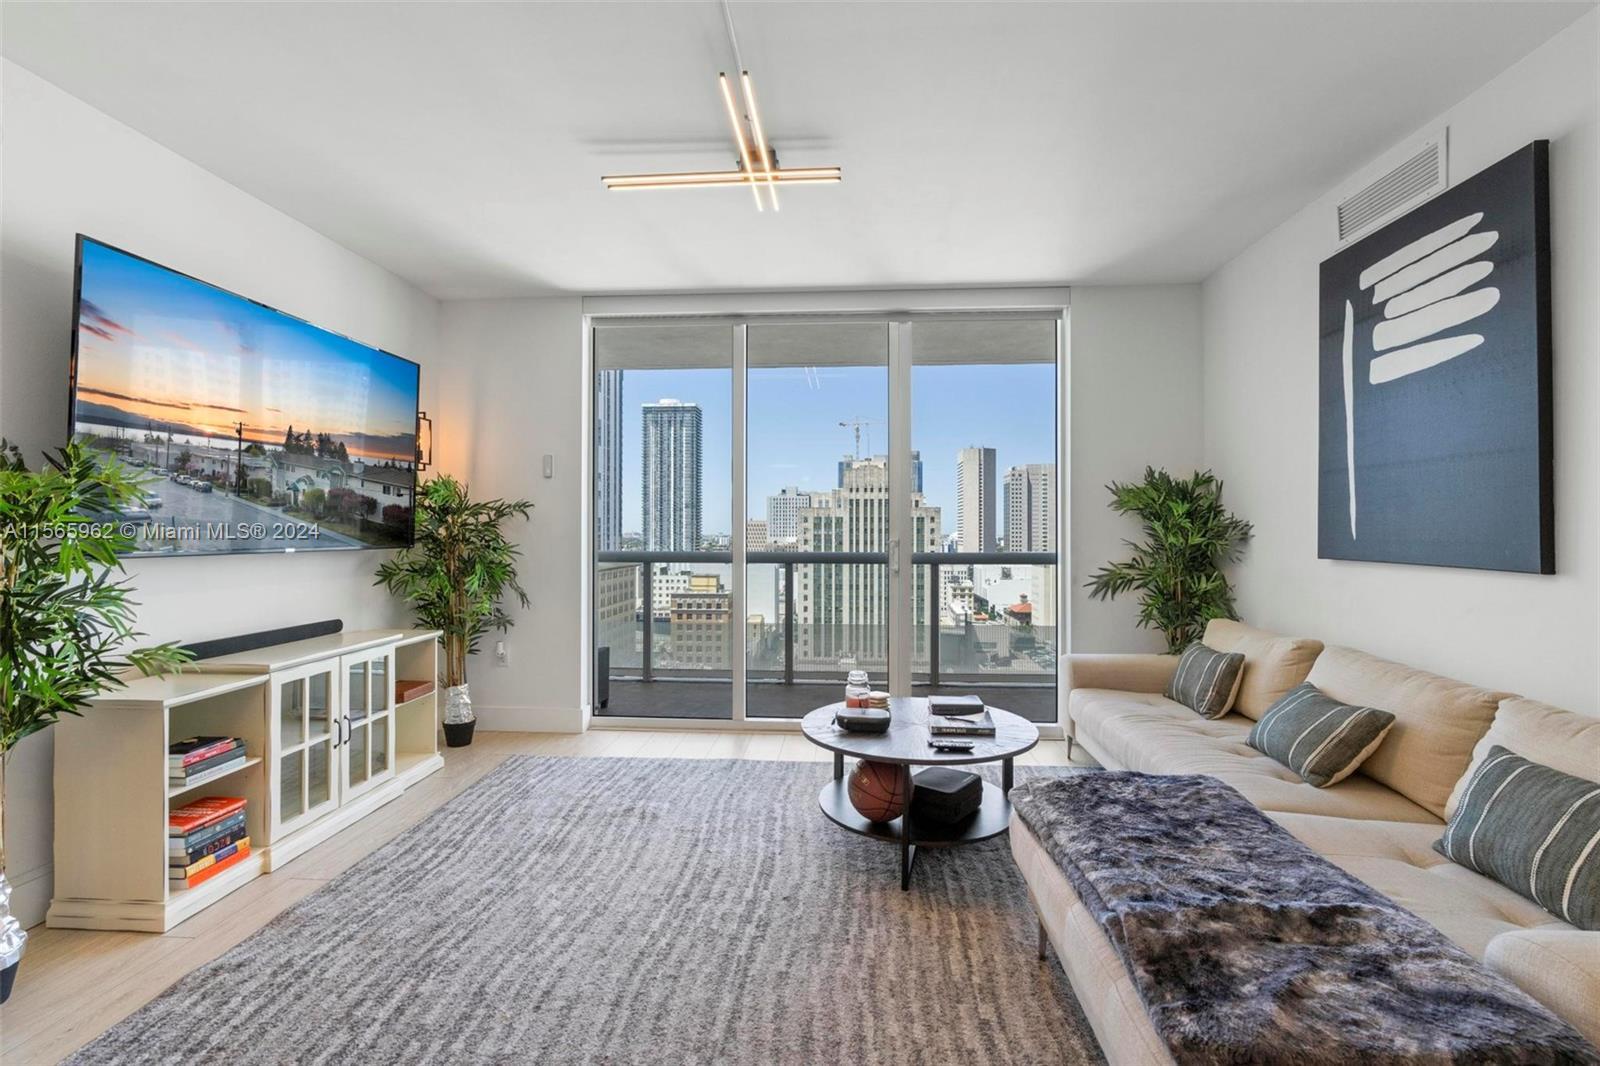 Beautifully Remodeled 2 bed / 2 bath unit with spectacular bay and city views. Wraparound balcony. F